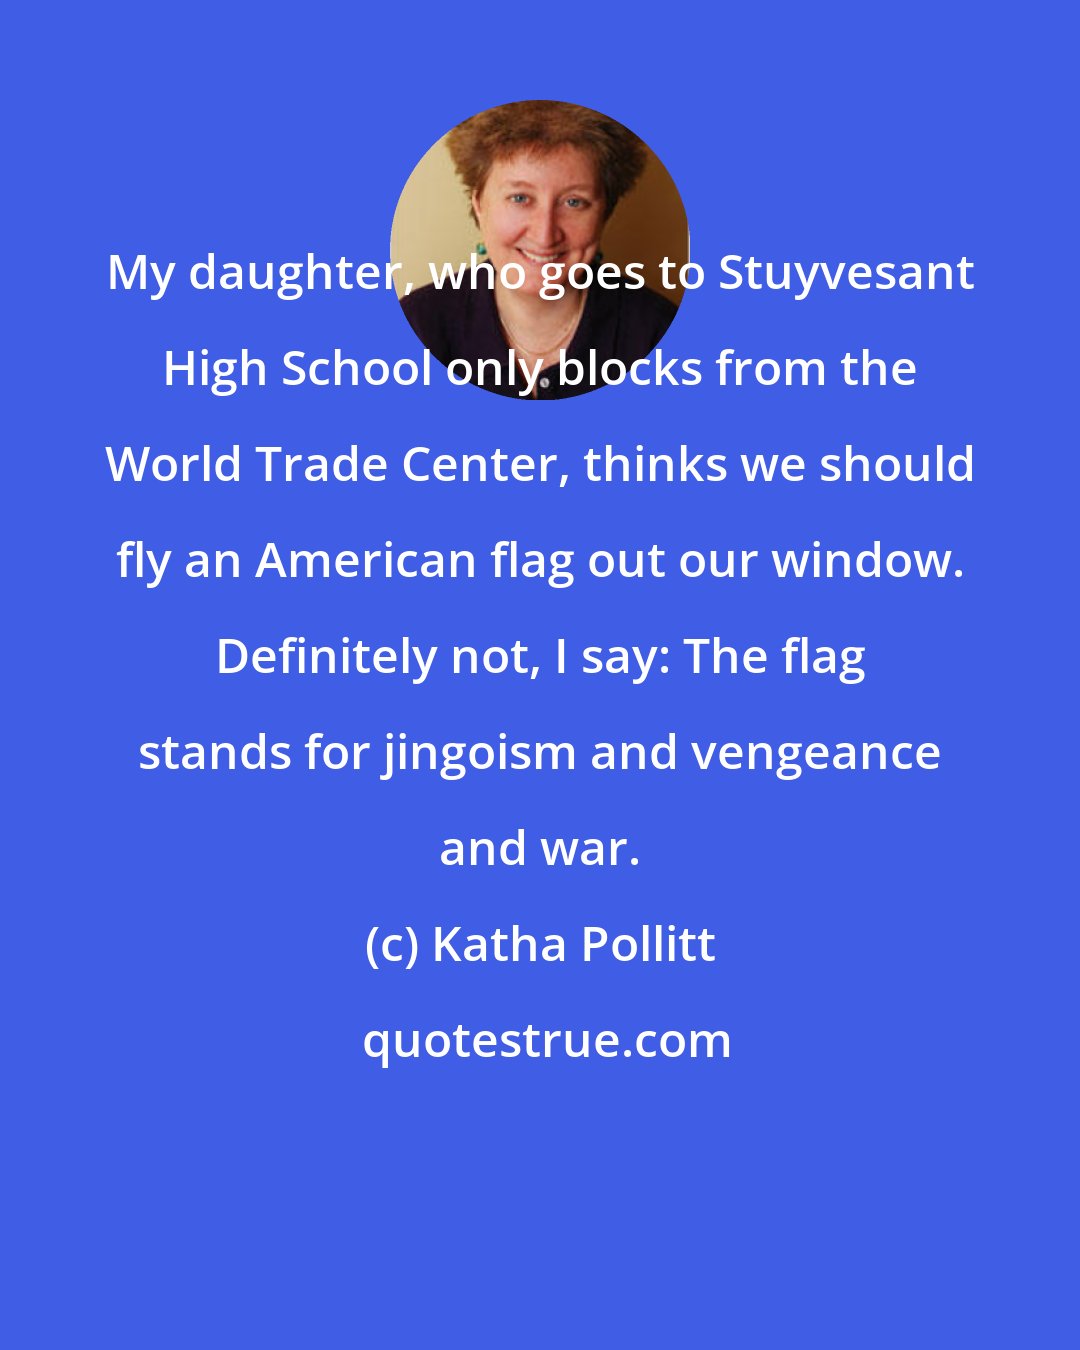 Katha Pollitt: My daughter, who goes to Stuyvesant High School only blocks from the World Trade Center, thinks we should fly an American flag out our window. Definitely not, I say: The flag stands for jingoism and vengeance and war.